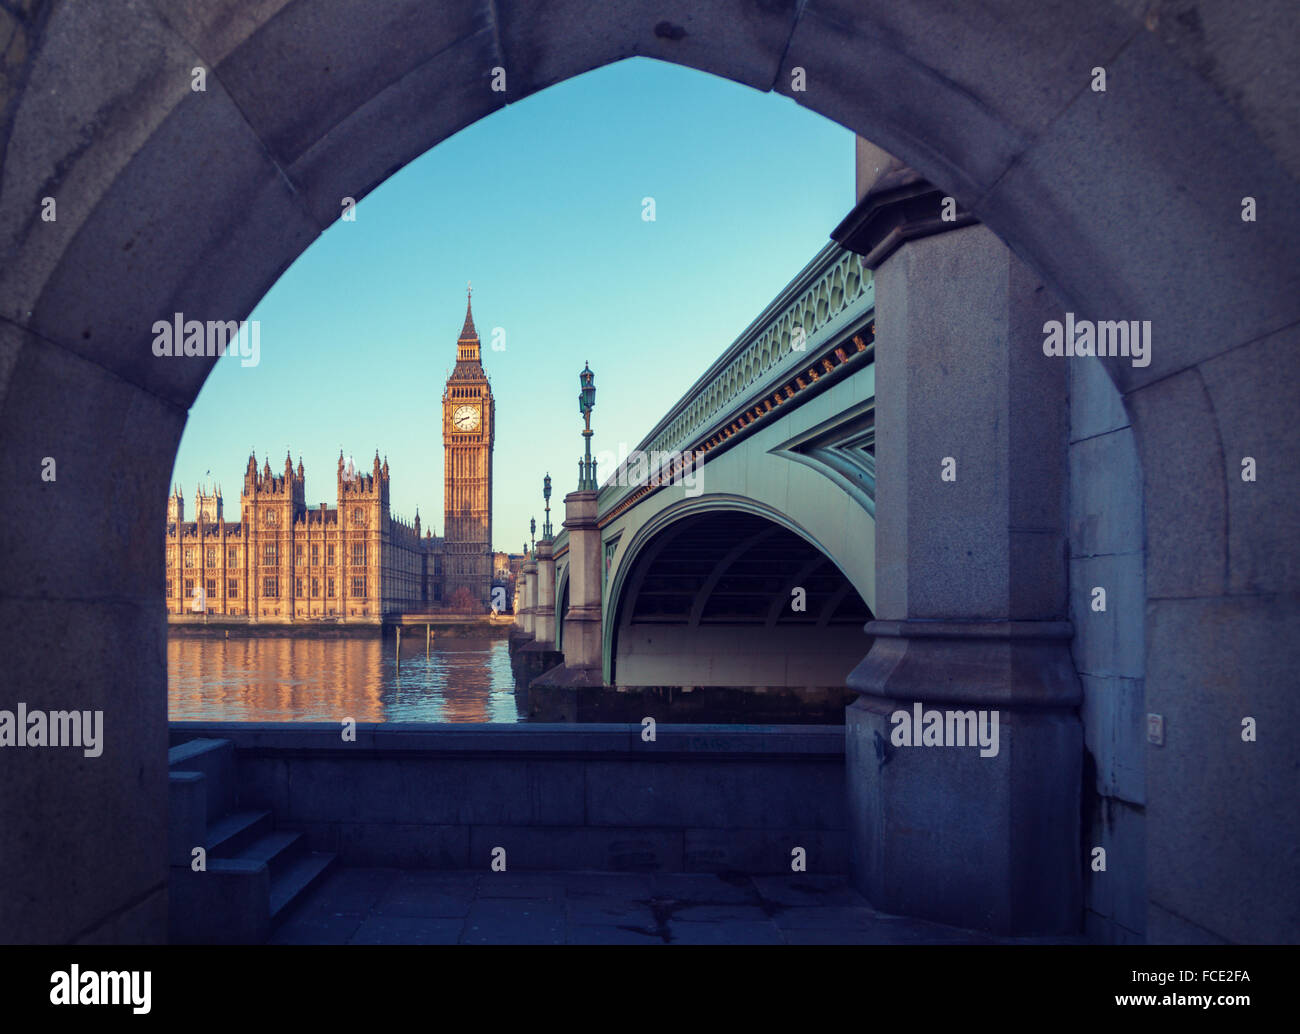 Famous Big Ben clock tower in Central London Stock Photo